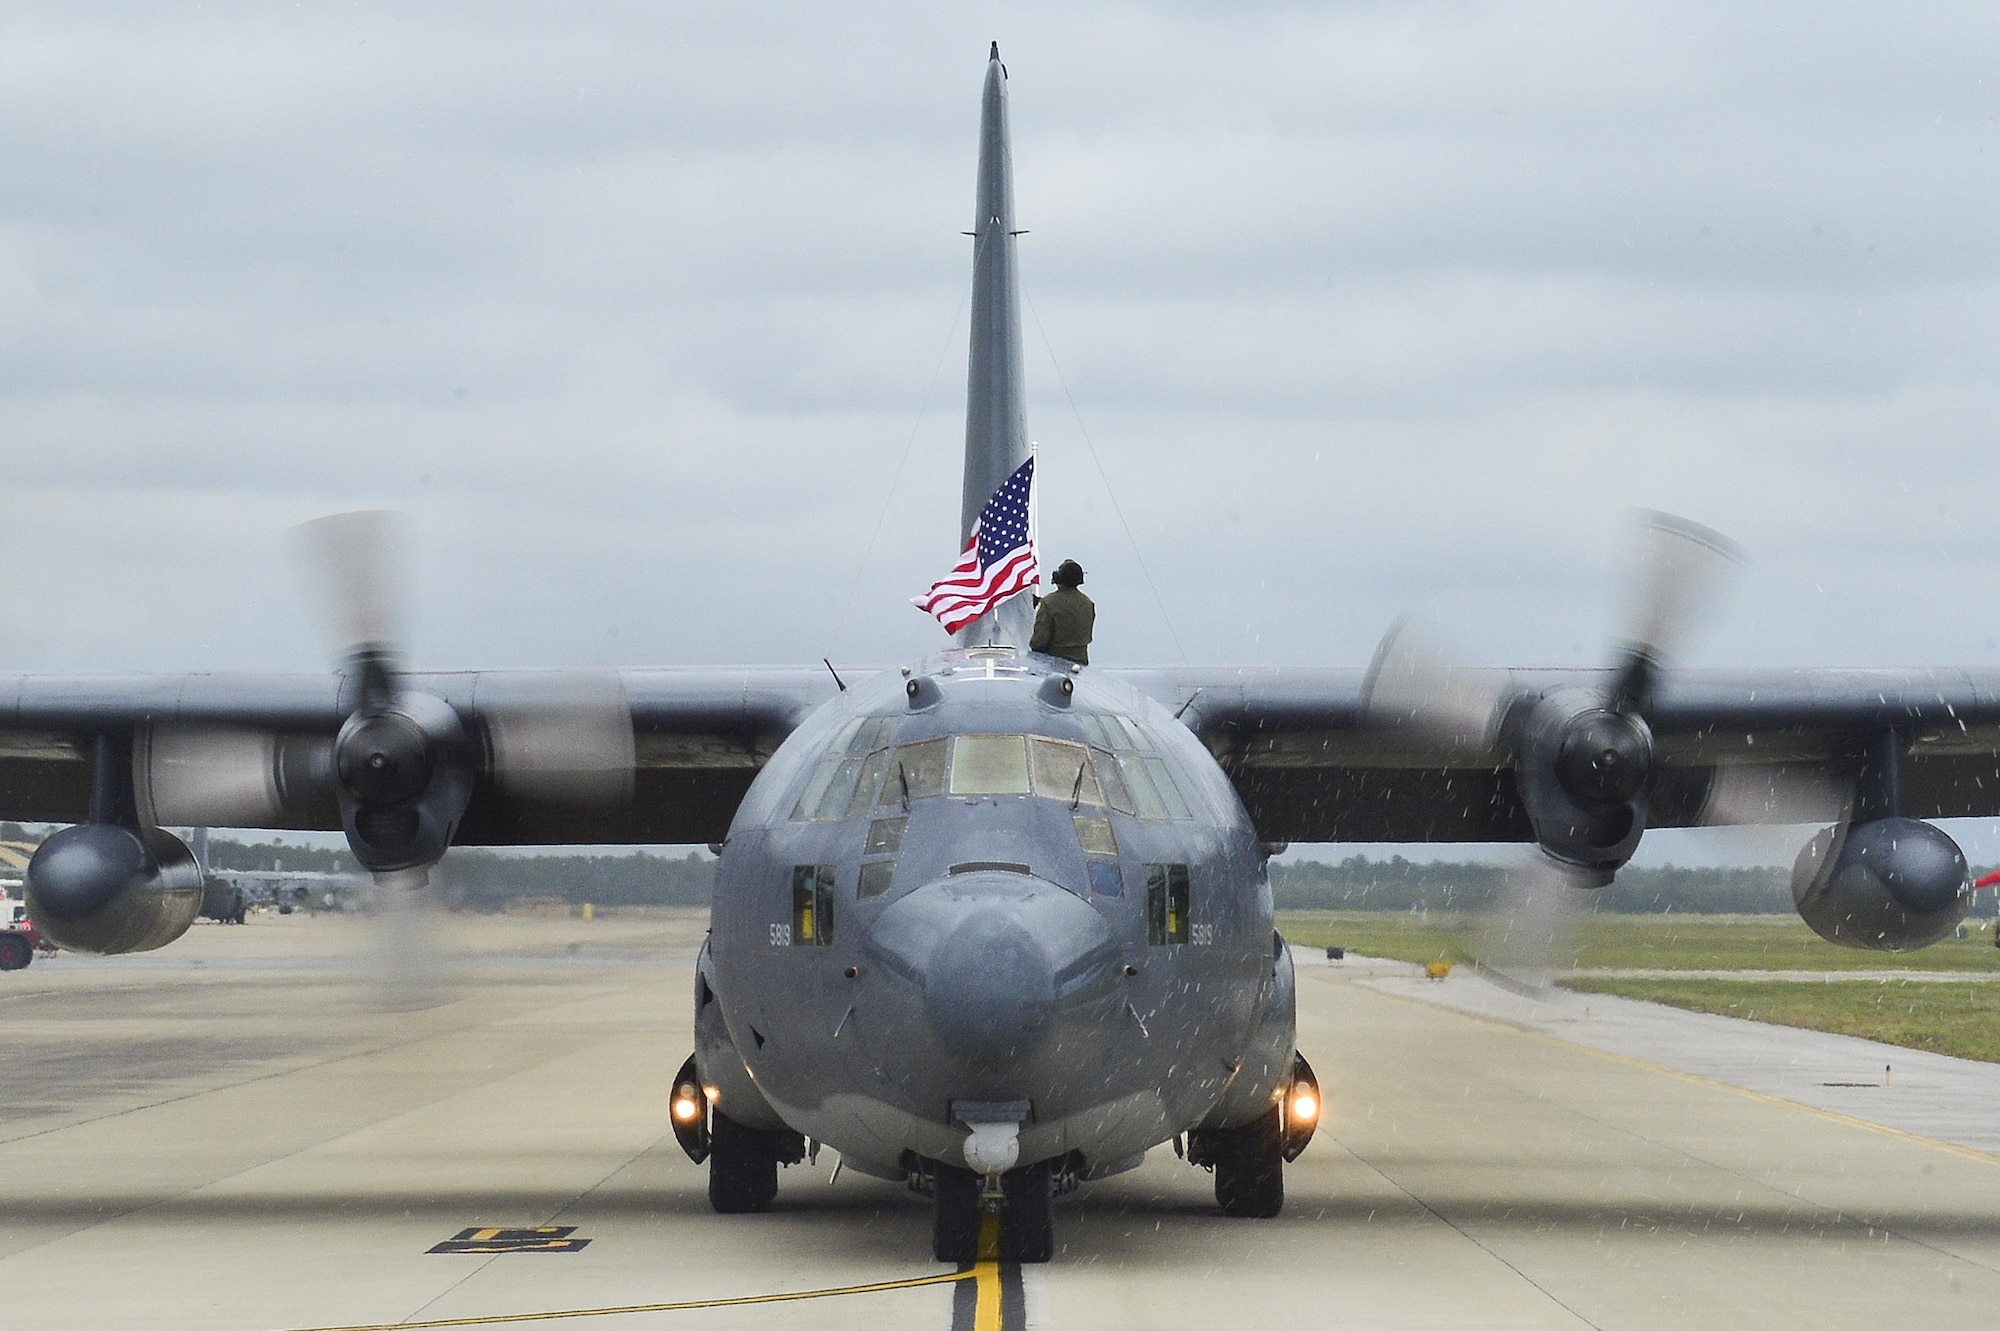 Tech. Sgt. Bruce Ramos, a Detachment 1, 1st Special Operations Group radio operator, raises an American flag from an MC-130P Combat Shadow while it taxies at Hurlburt Field, Fla., May 15, 2015. The final two MC-130Ps in the Air Force landed for the last time at Hurlburt Field in front of more than 400 people, and their last flight was to the boneyard at Davis-Monthan Air Force Base, Ariz., June 1, 2015. (U.S. Air Force photo/Senior Airman Jeff Parkinson)